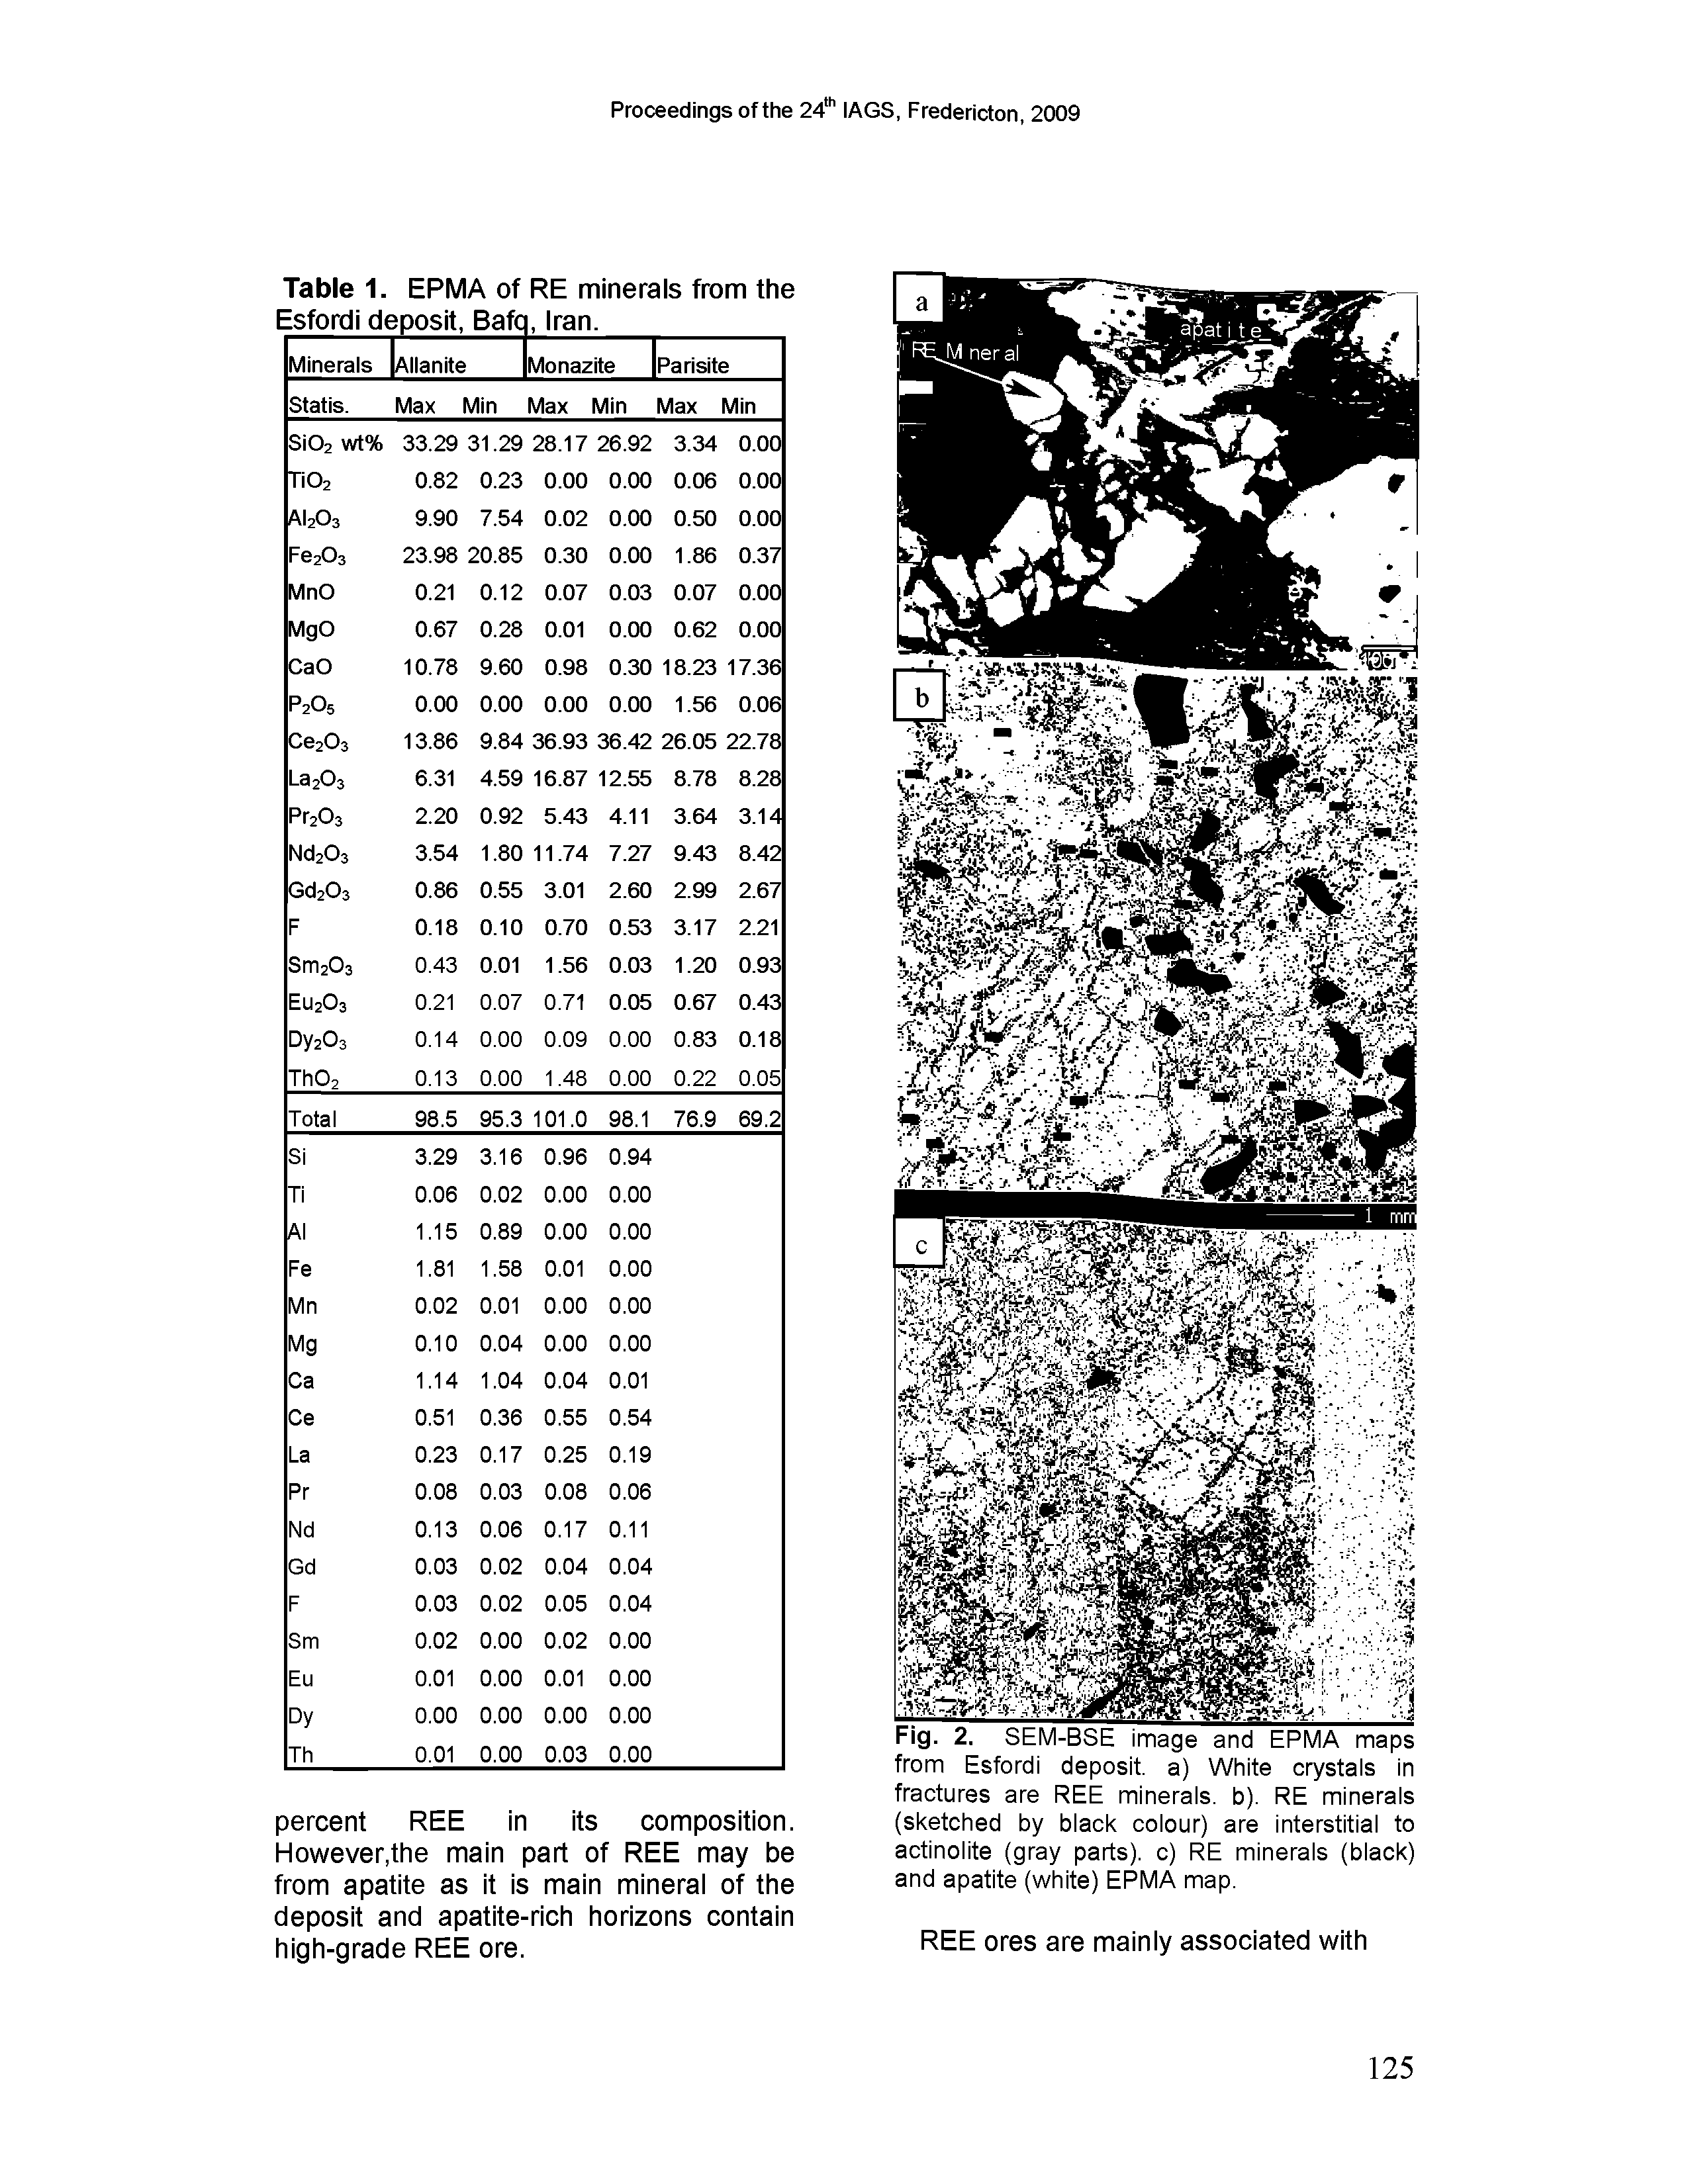 Fig. 2. SEM-BSE image and EPMA maps from Esfordi deposit, a) White crystals in fractures are REE minerals, b). RE minerals (sketched by black colour) are interstitial to actinolite (gray parts), c) RE minerals (black) and apatite (white) EPMA map.